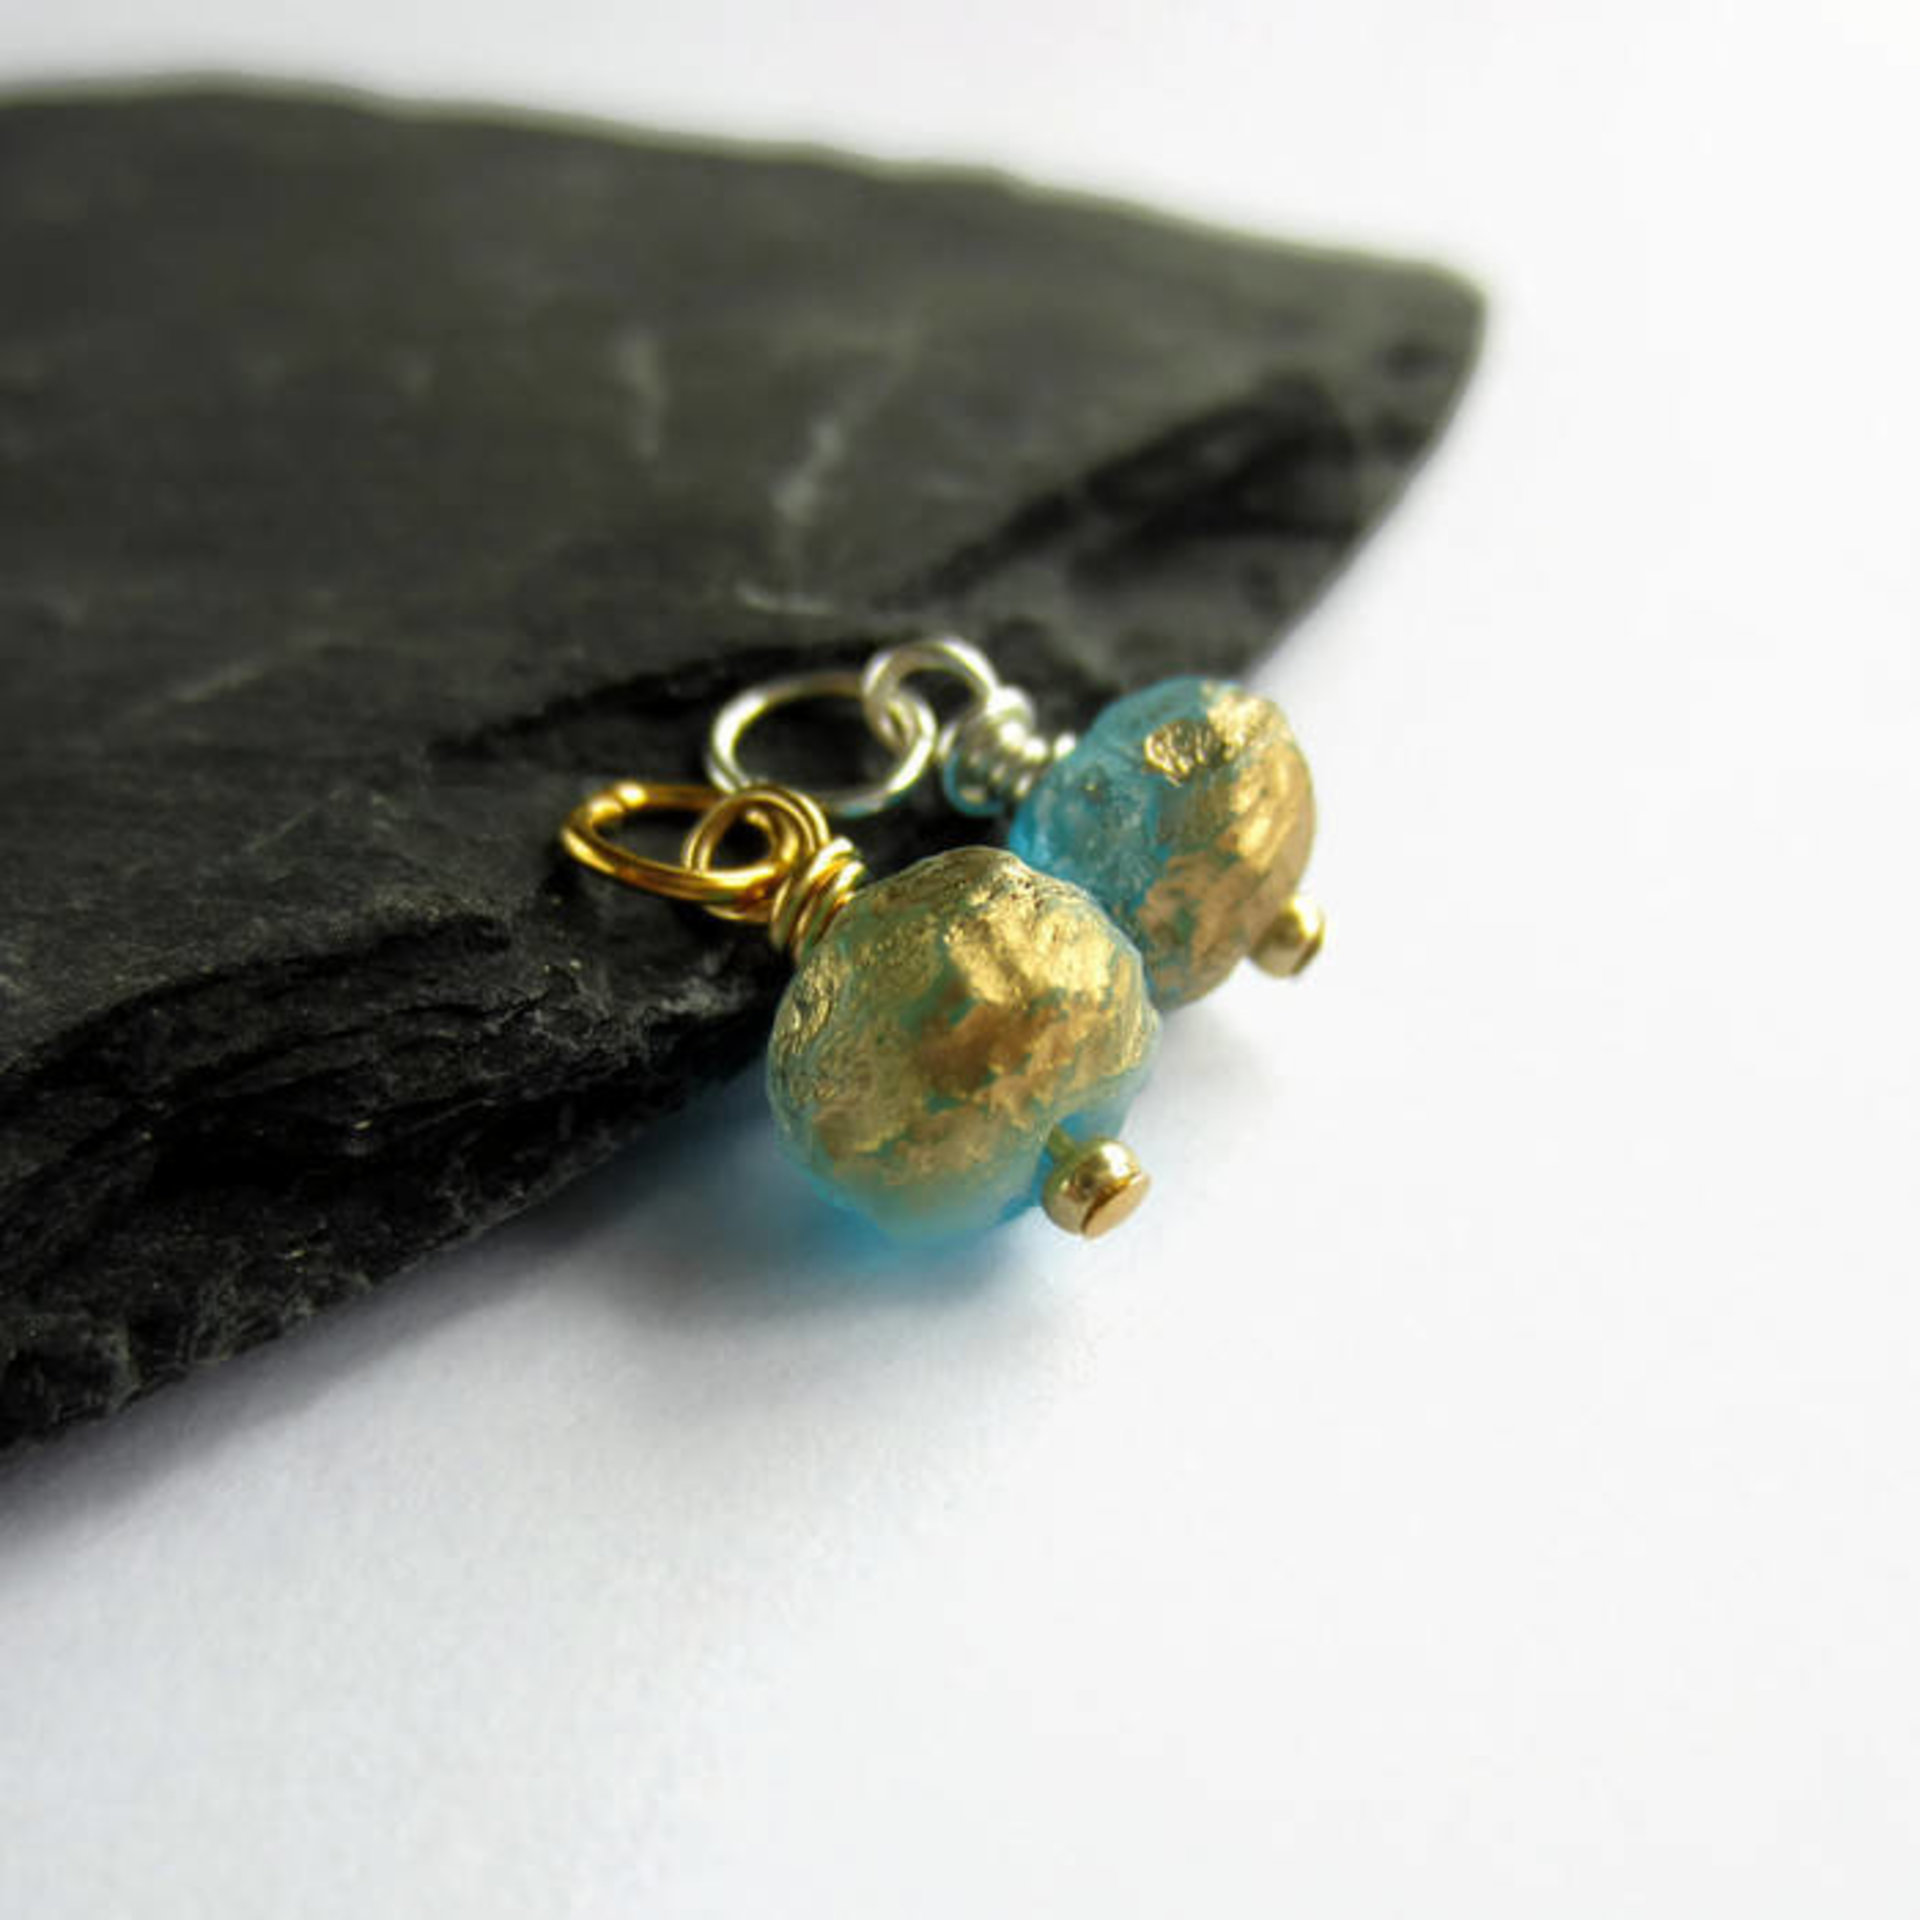 Aqua Blue and Gold Czech Glass Rondelle Charm ~ Handmade by The Tiny Tree Frog Jewellery